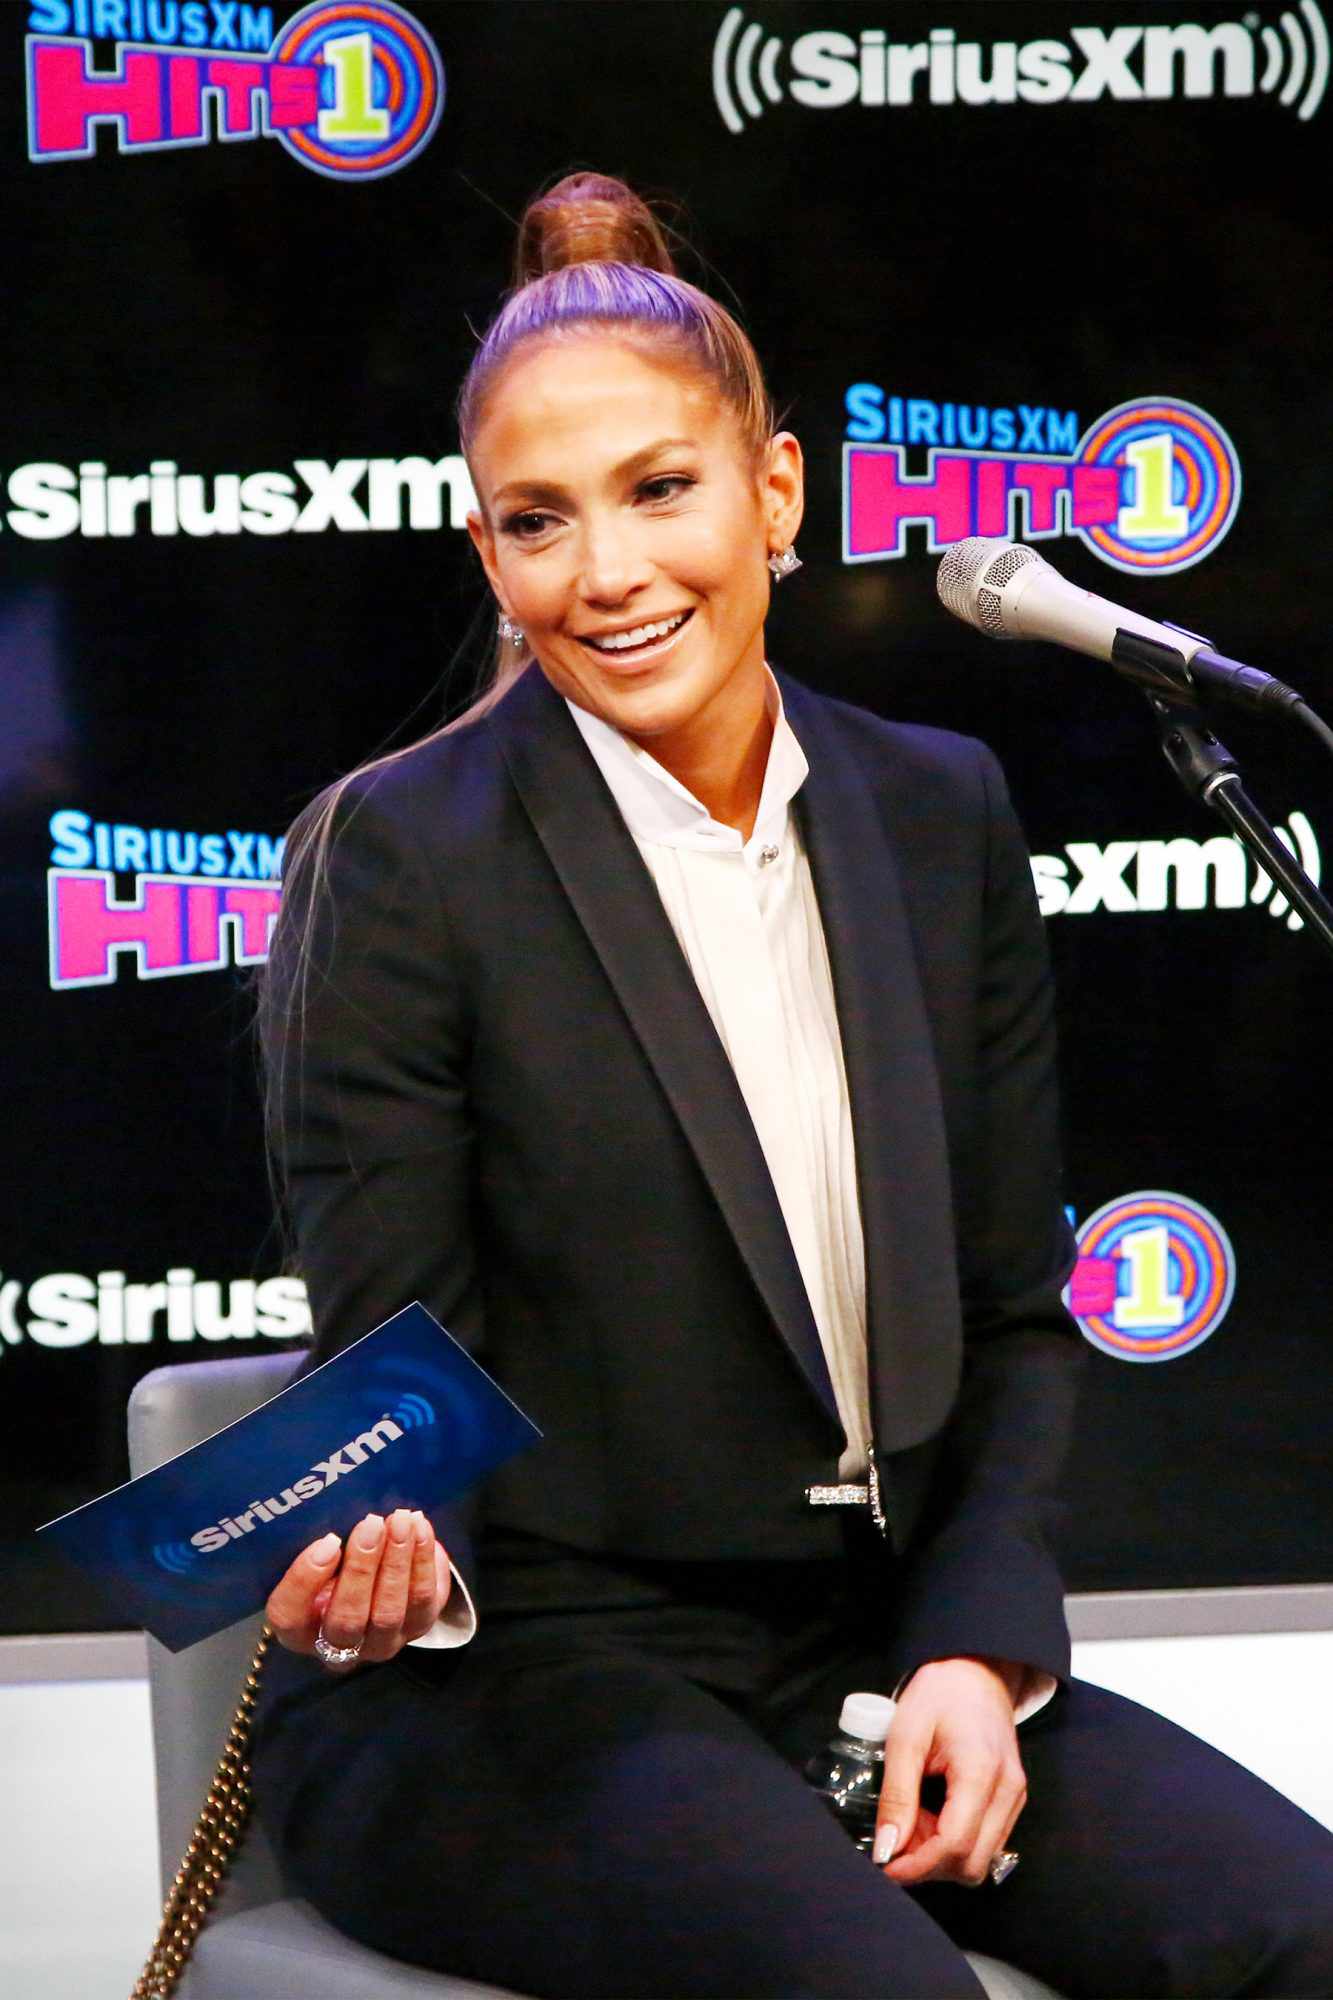 Jennifer Lopez Visits 'The Morning Mash Up' On SiriusXM Hits 1 Channel At The SiriusXM Studios In New York